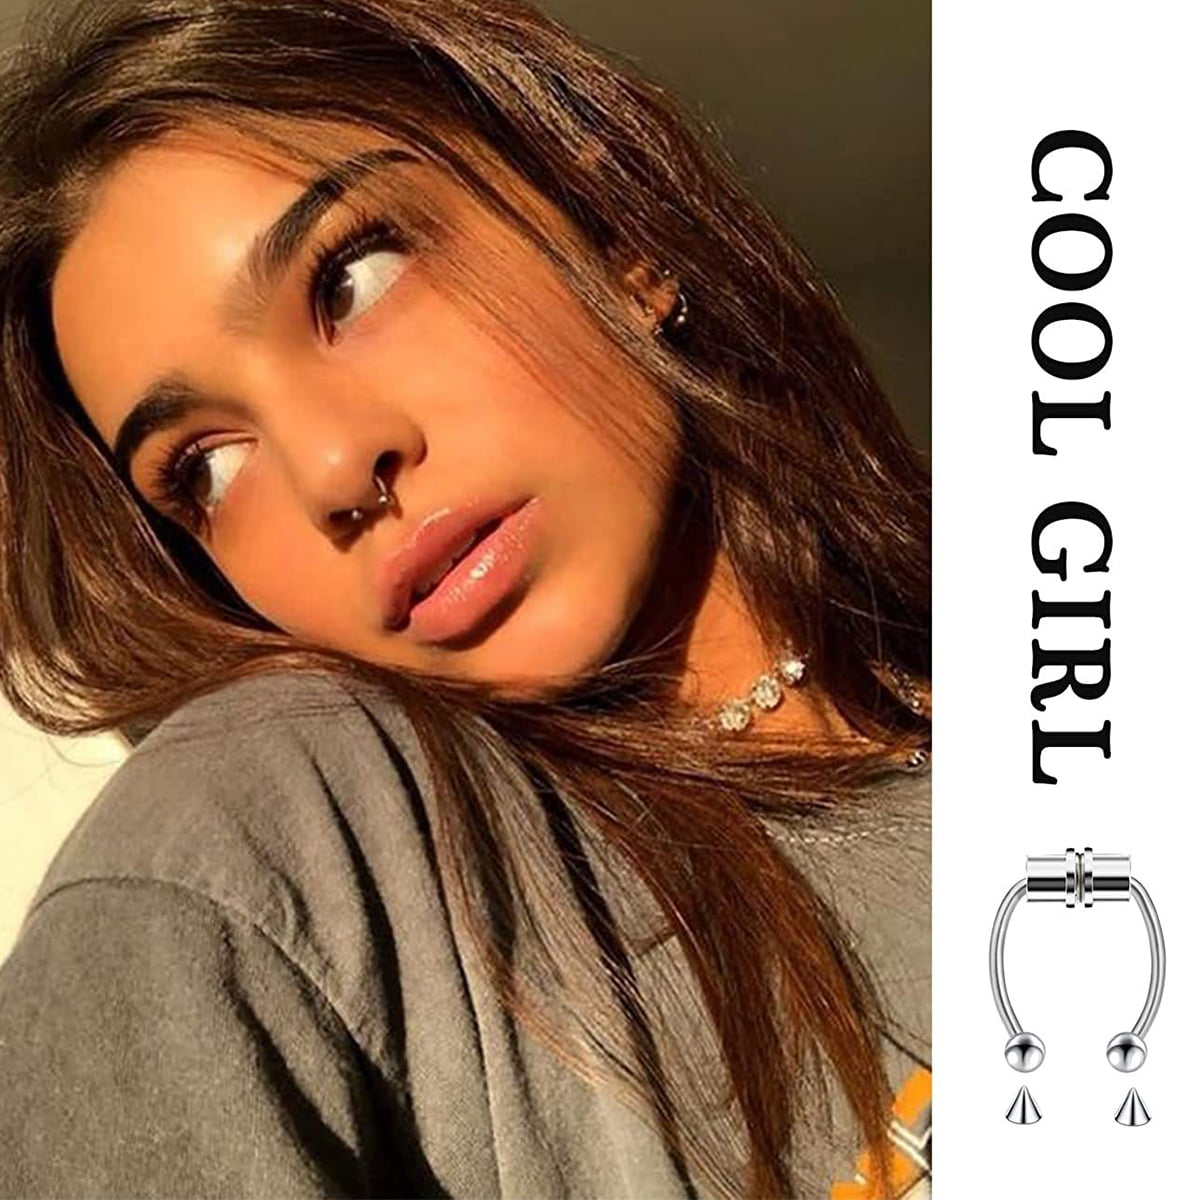 10pcs Stainless Steel Double Nose Hoop Ring Silver Color Spiral Nose Hoop  Set for Women Men Nostril Piercing Jewelry